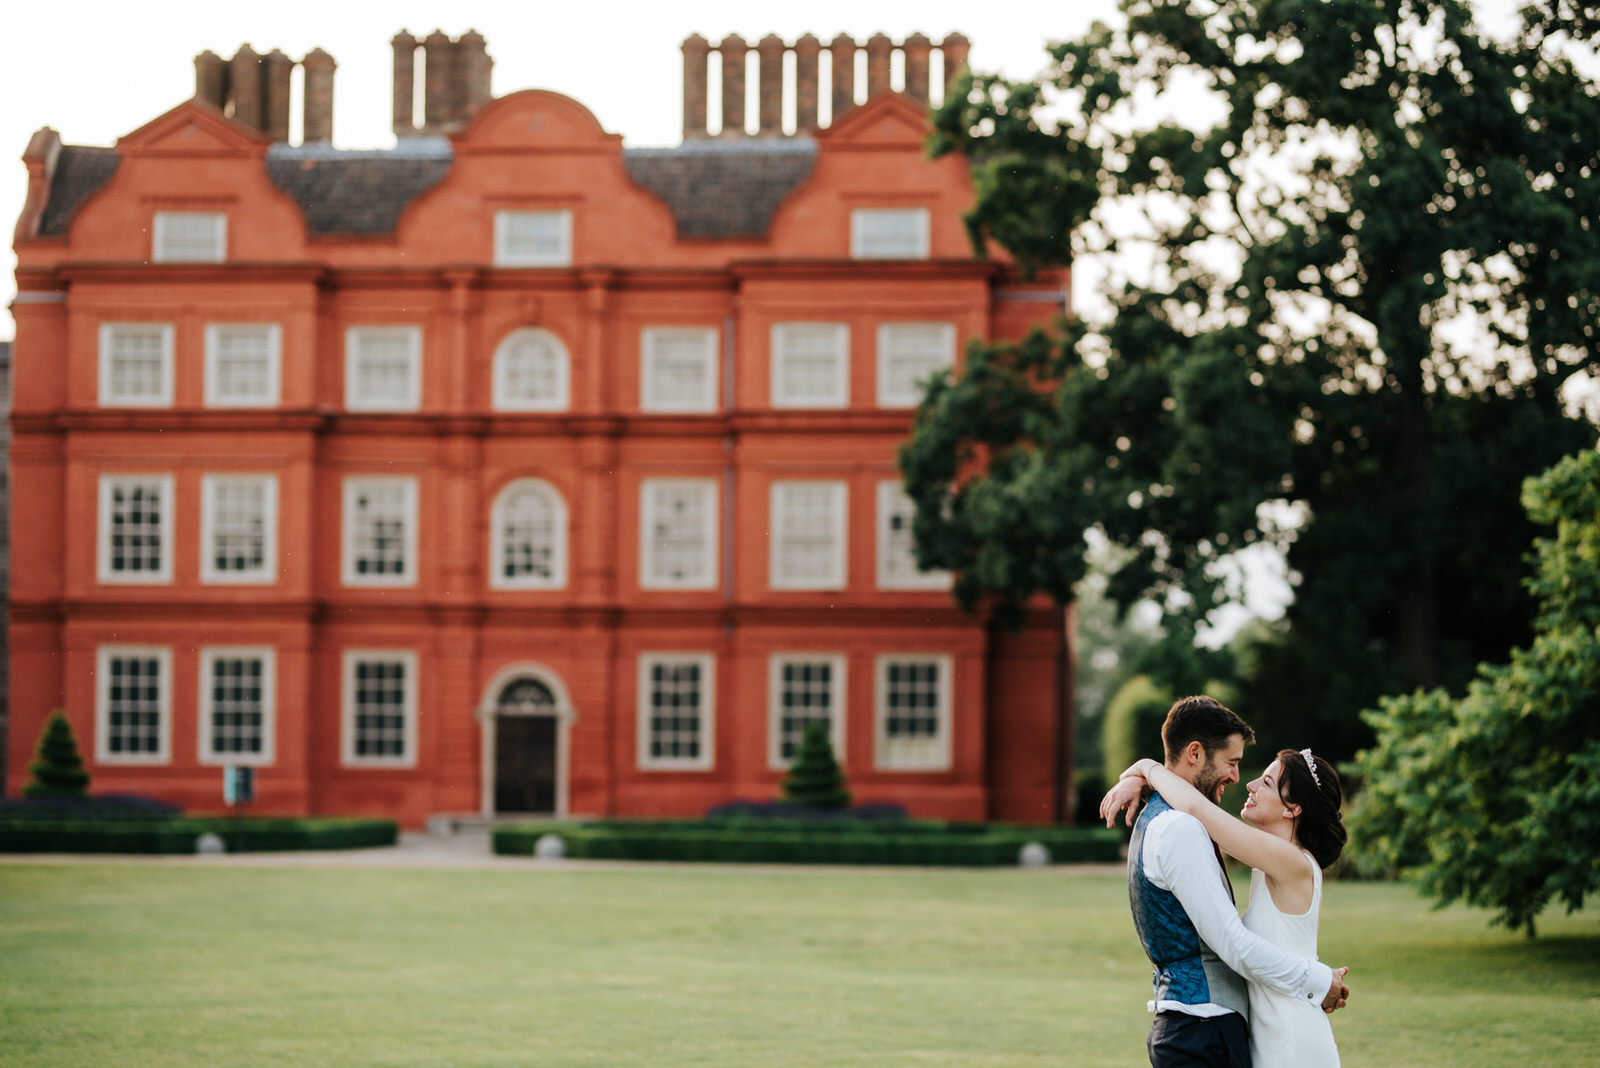  Bride and groom pose in front of kew palace in golden evening light at kew gardens wedding 